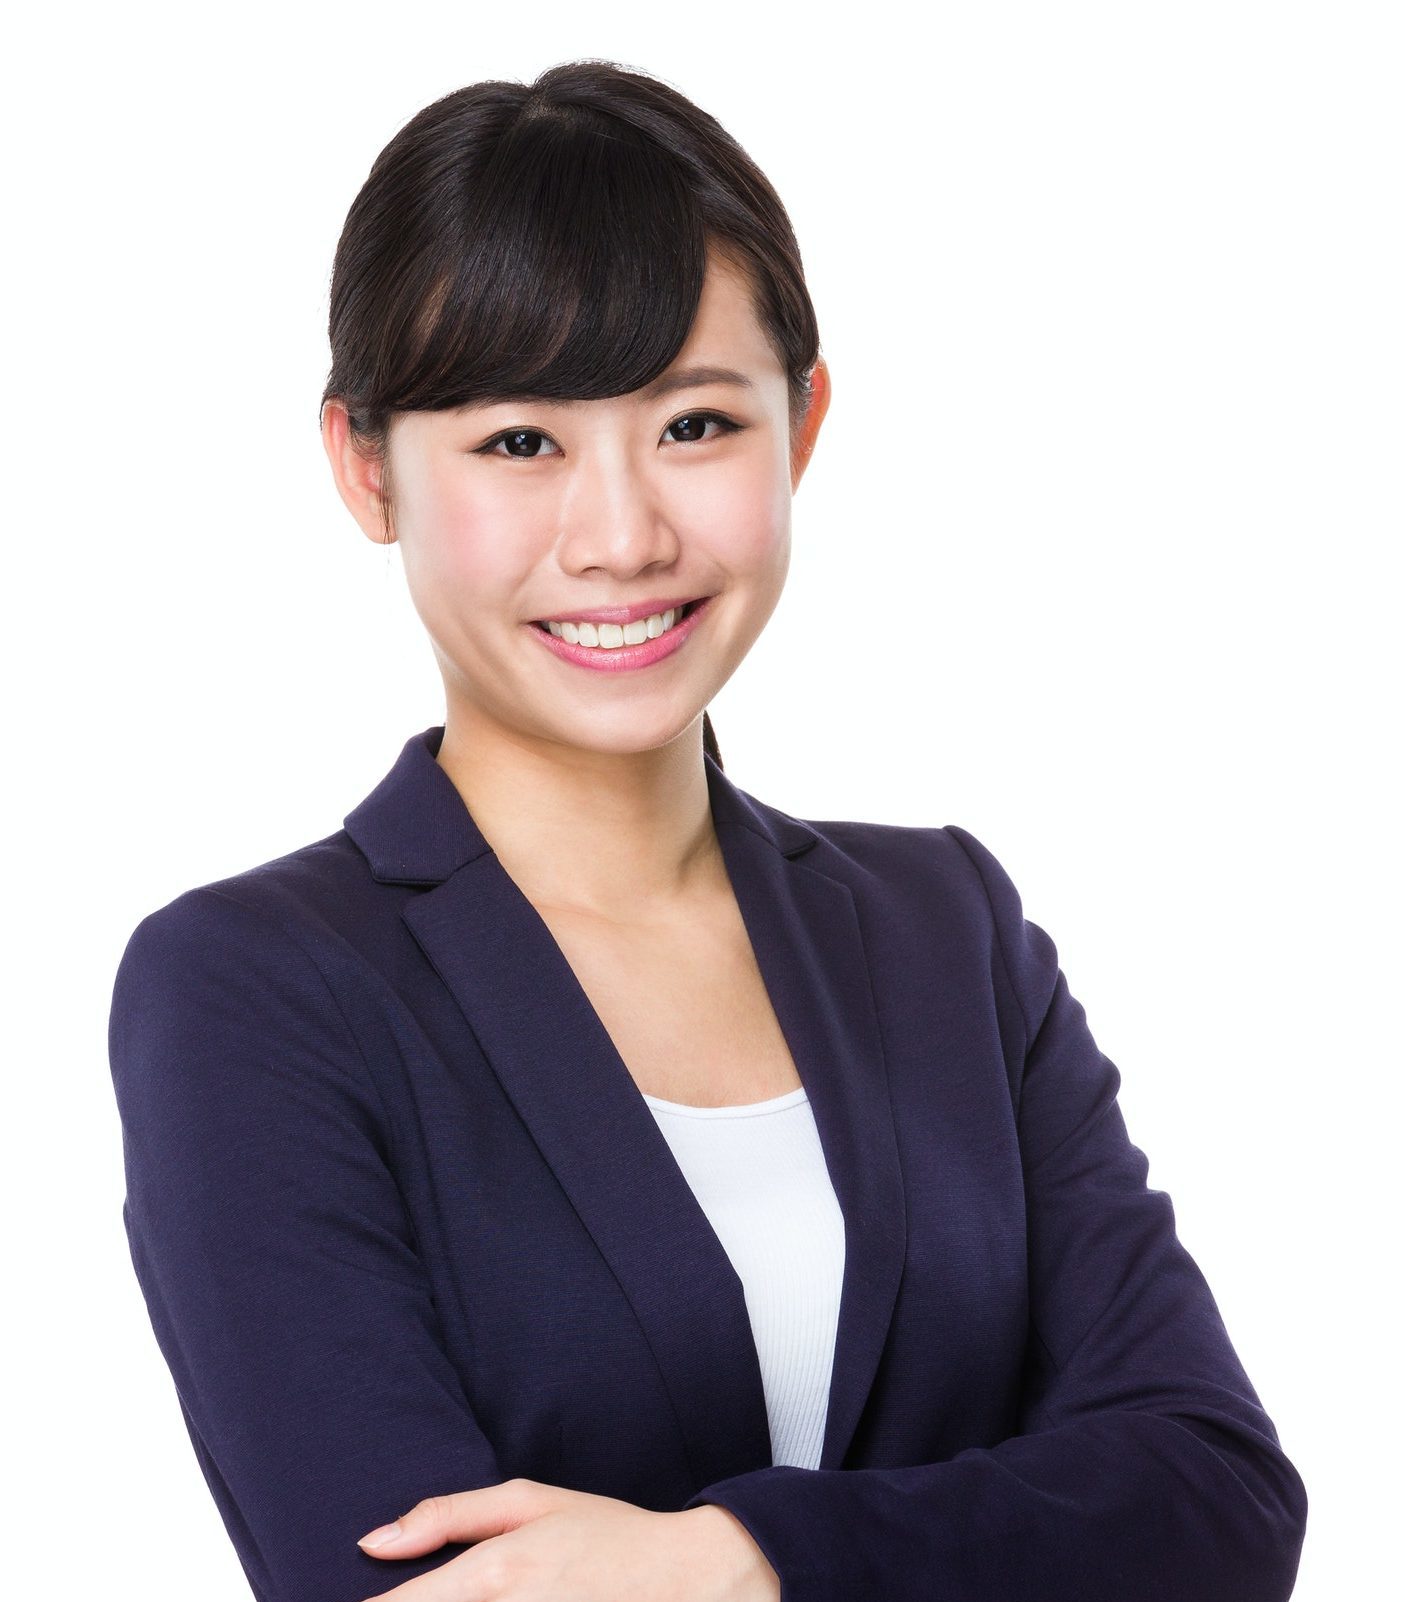 Formal Asian Business woman with crossed arms